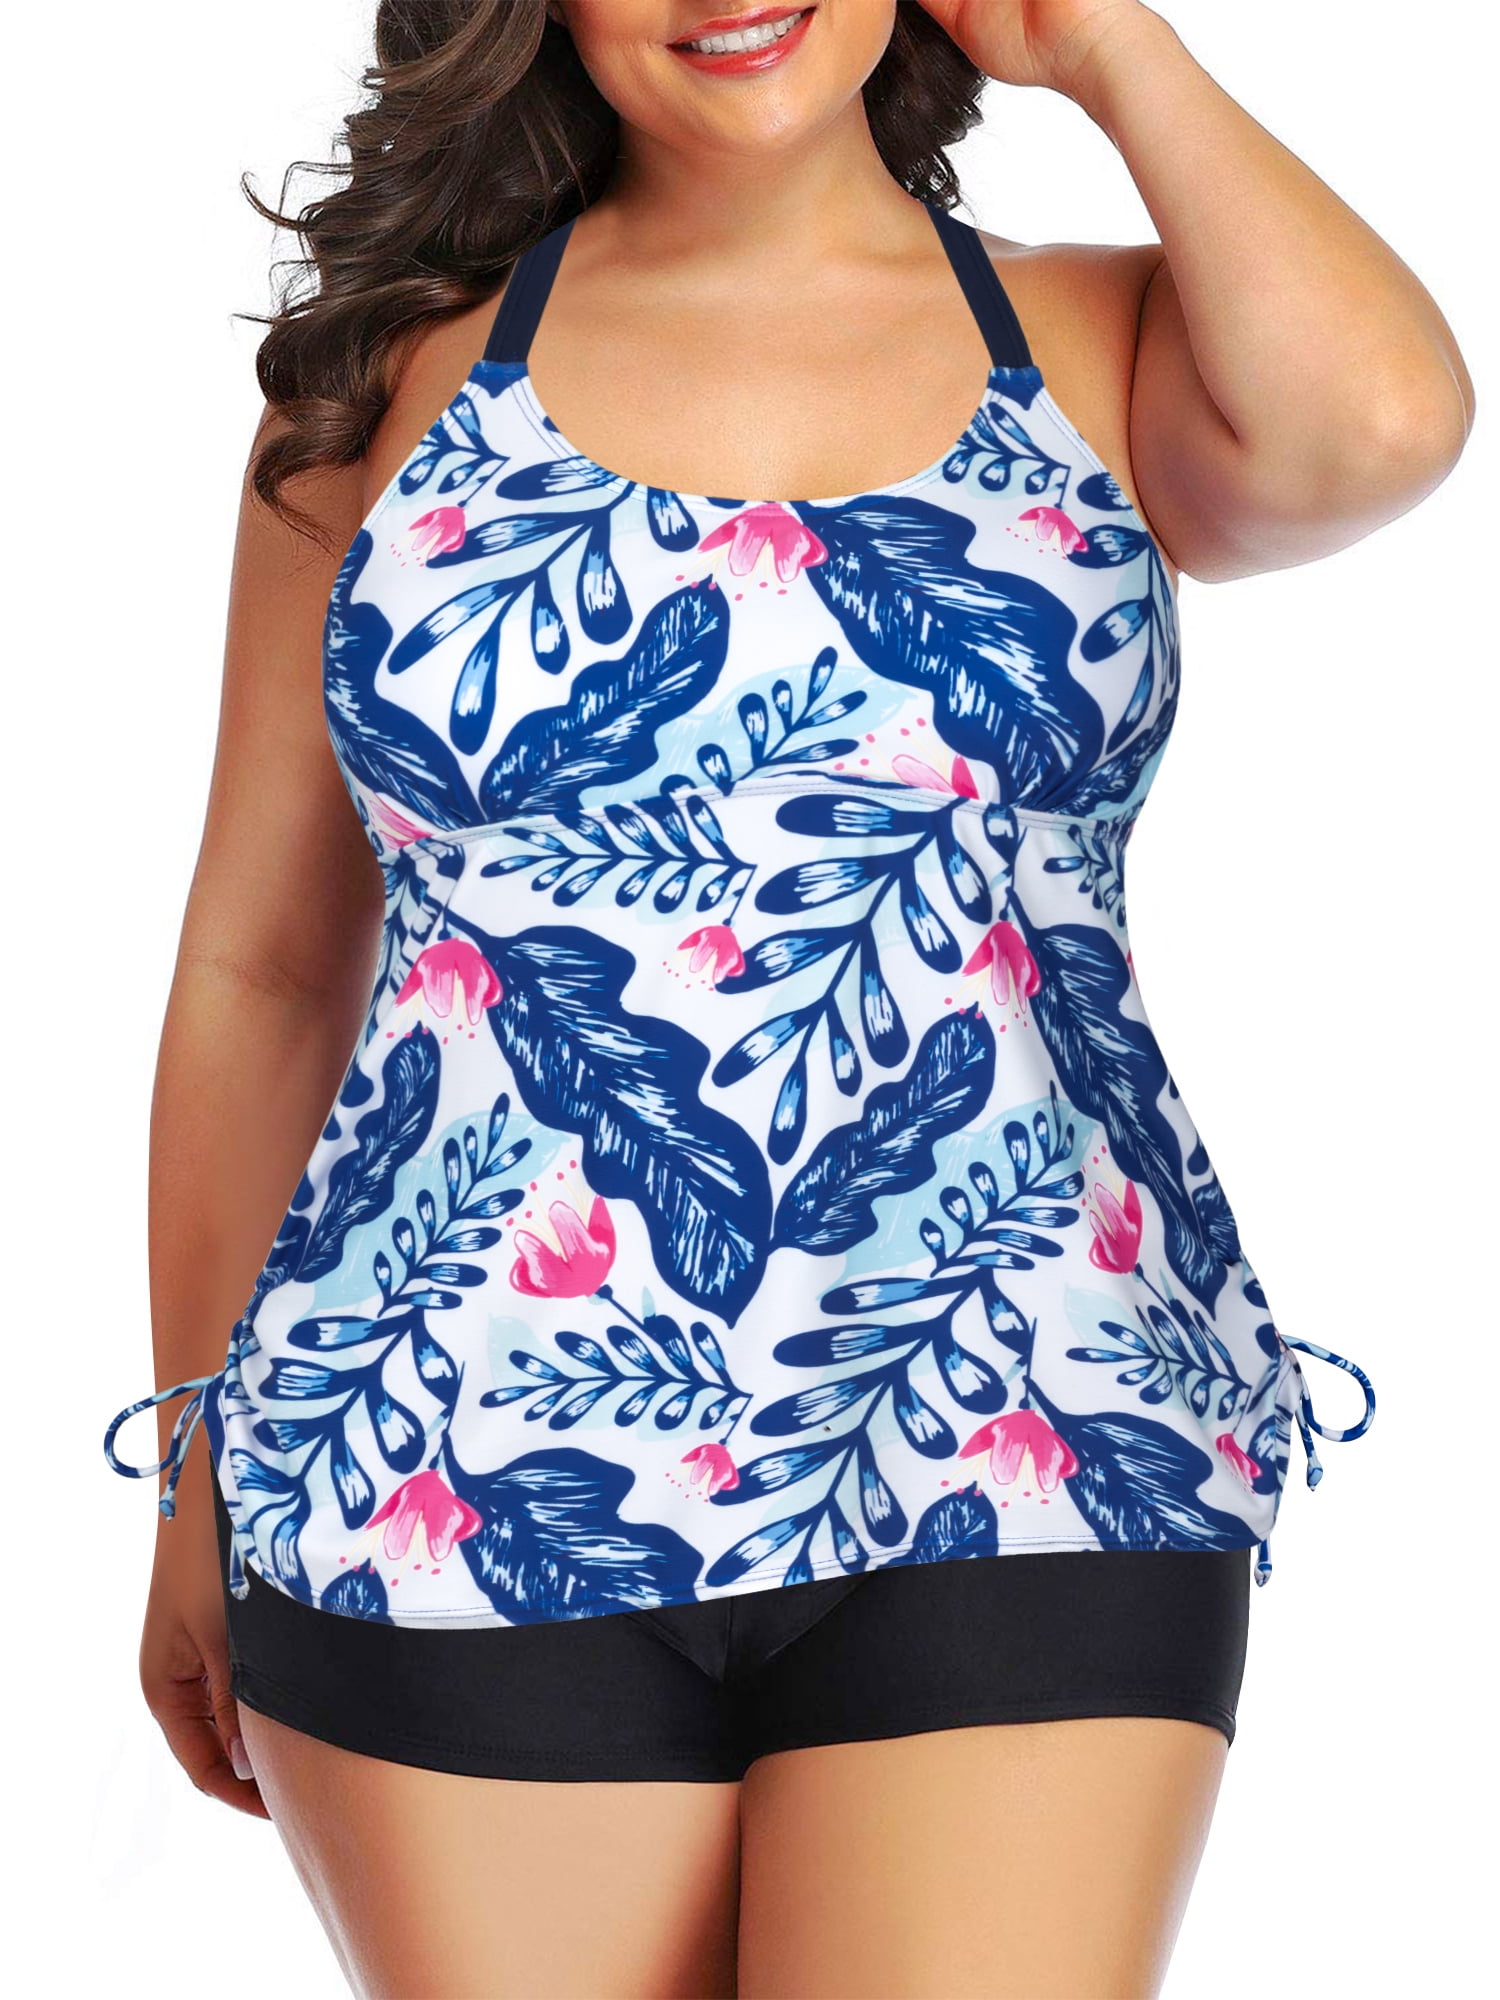 Chama Tankini Swimsuits for Women Plus Size Drawstring Bathing Suits with  Boyshorts Two Piece Floral Print Swimwear 